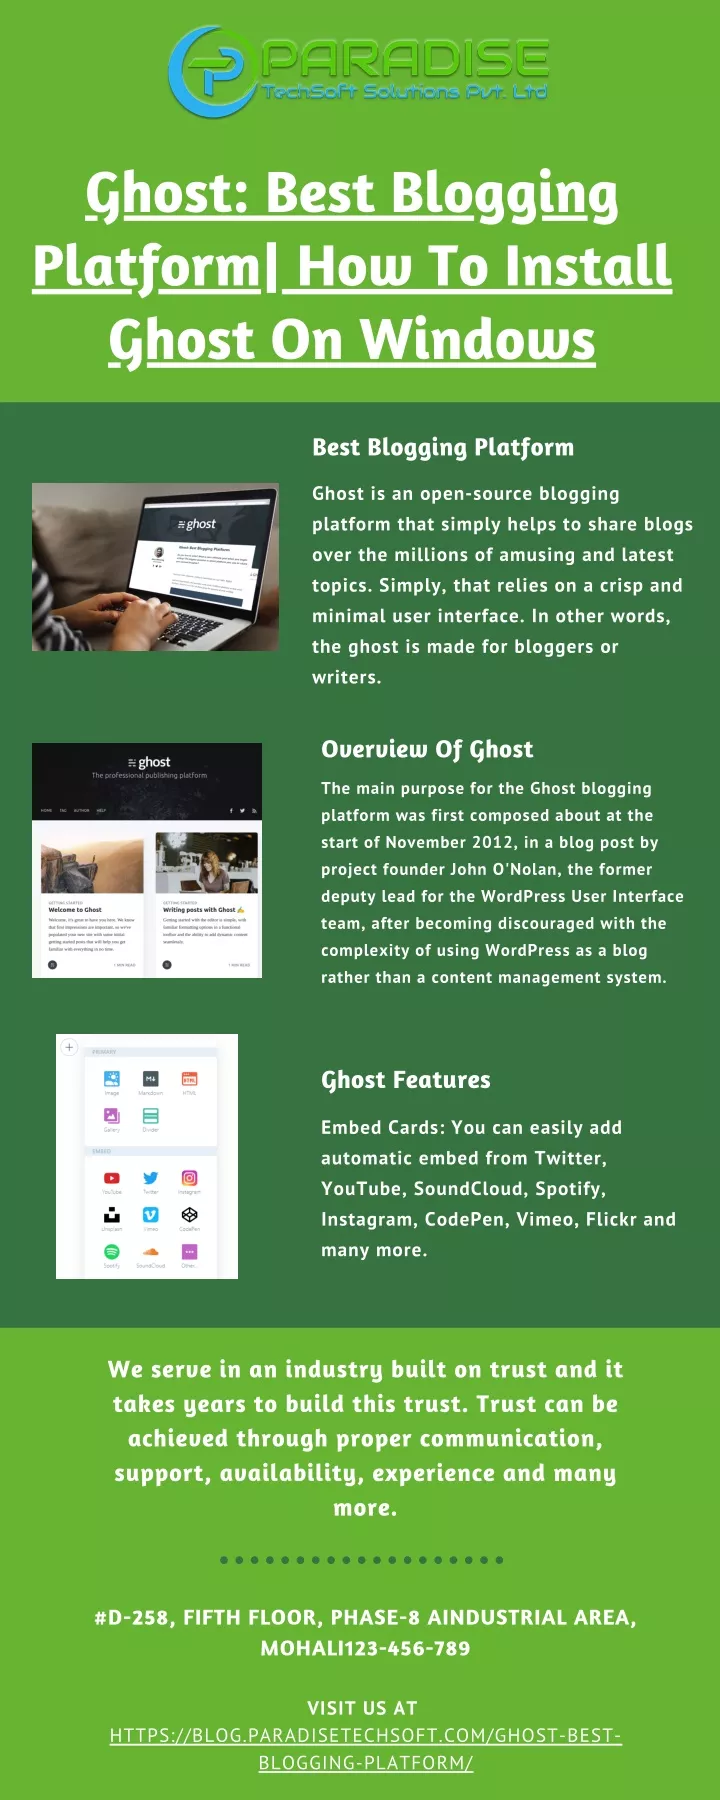 ghost best blogging platform how to install ghost